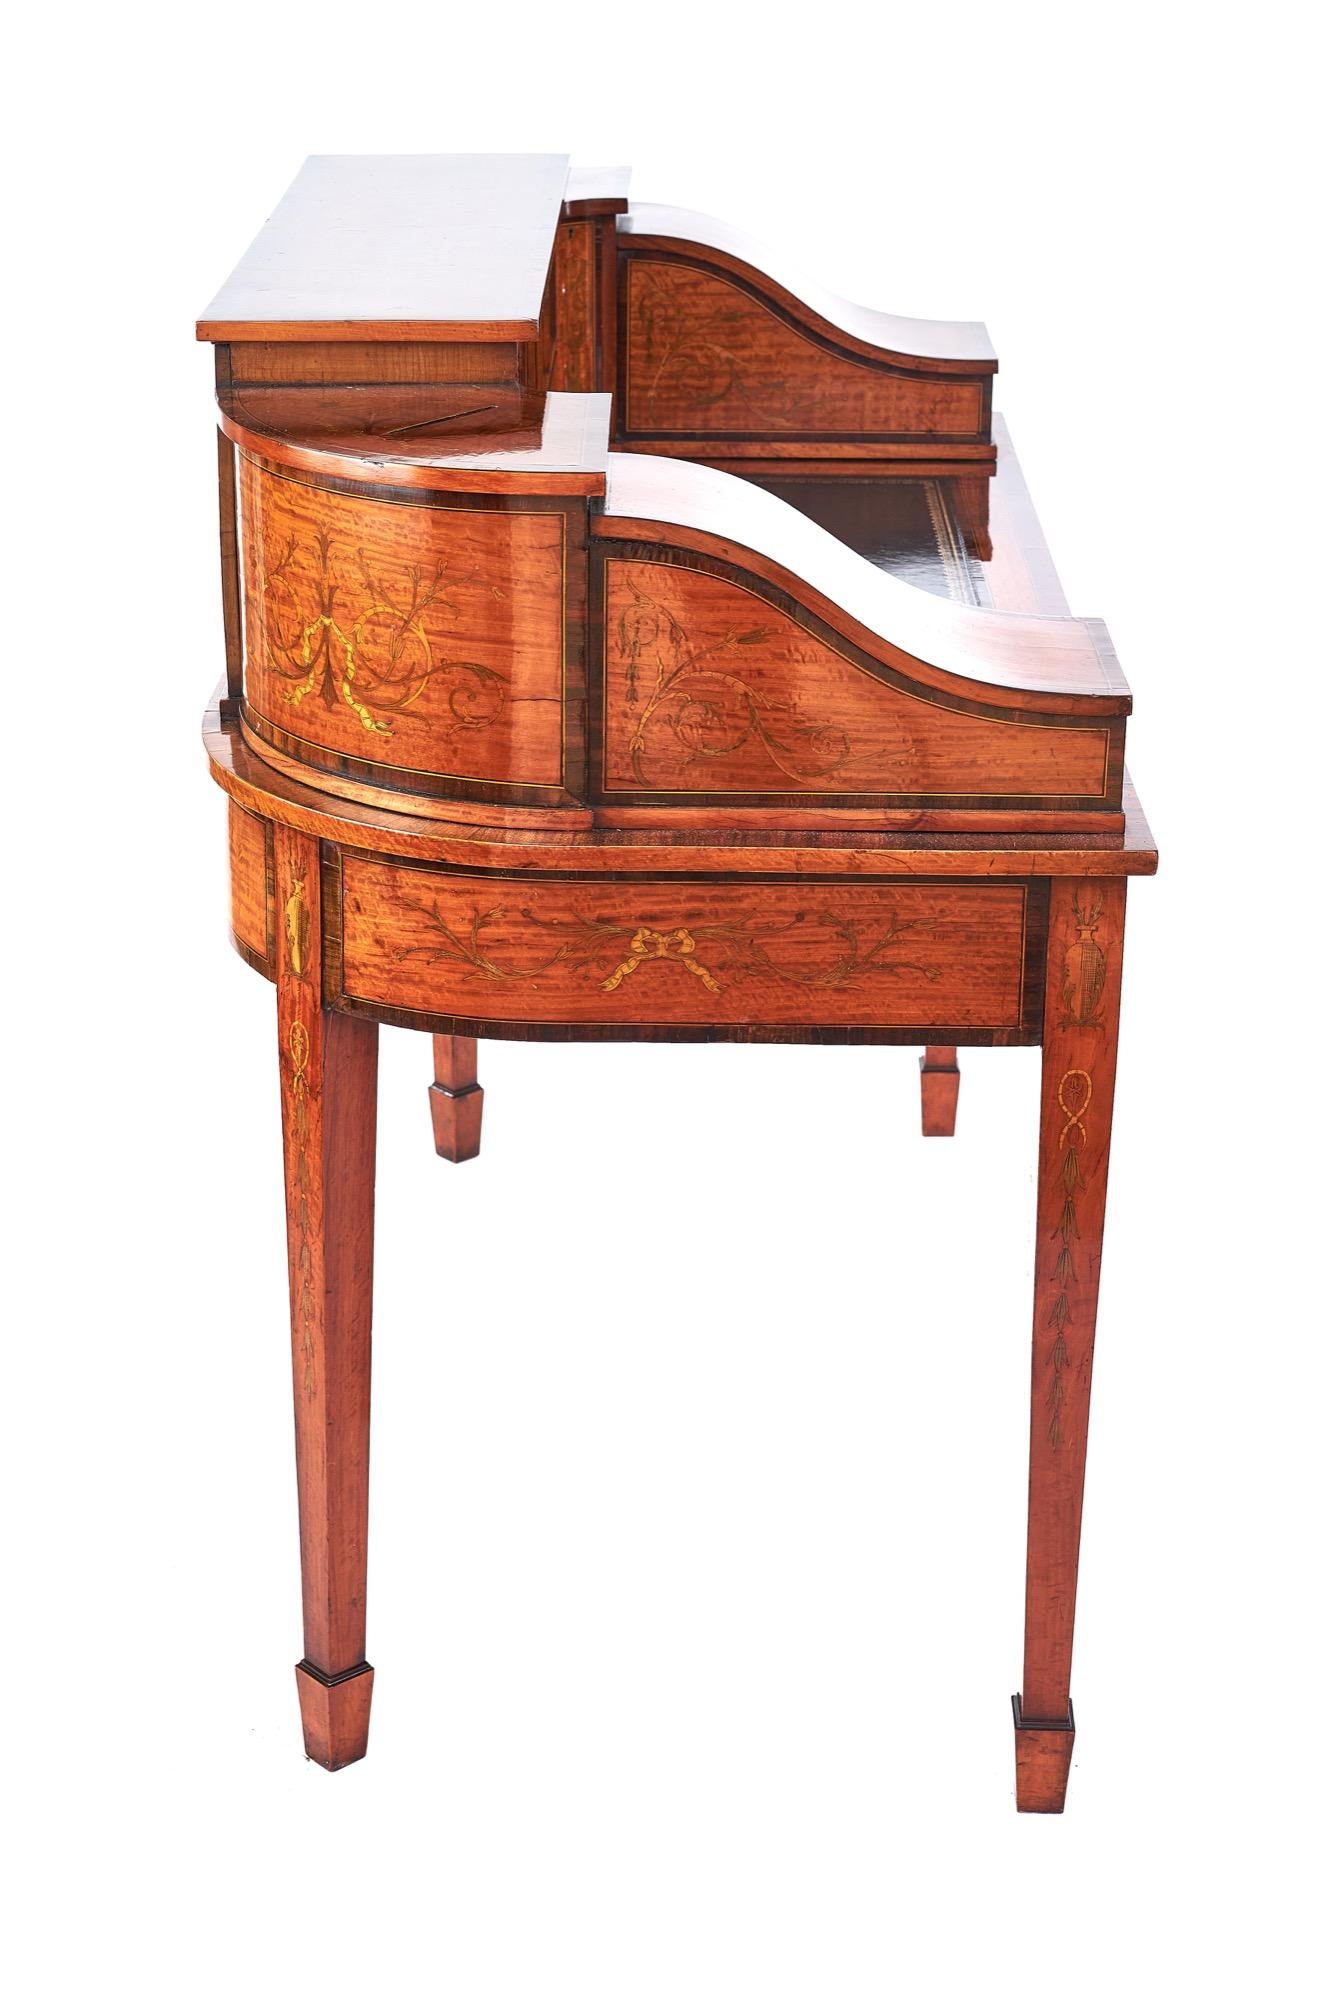 Late 19th Century Fine Sheraton Revival Satinwood Inlaid Carlton House Desk. with Letter Boxes, Ci For Sale